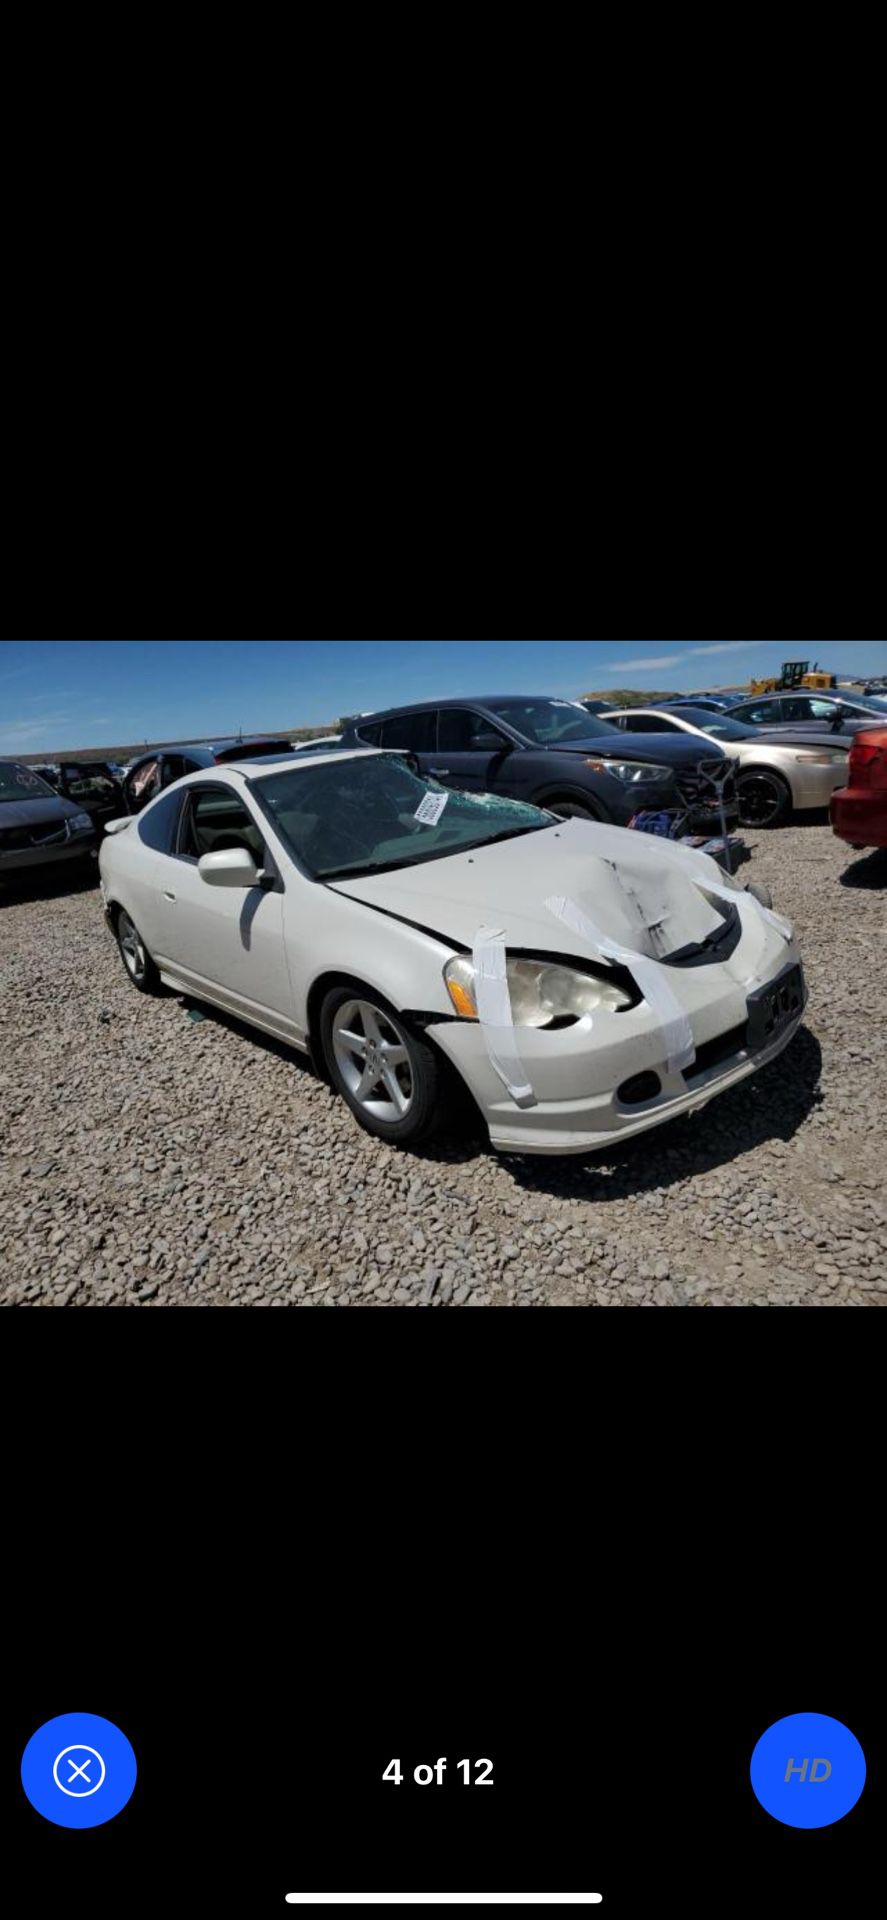 2003 Acura Rsx Type S “PARTING OUT” Parts